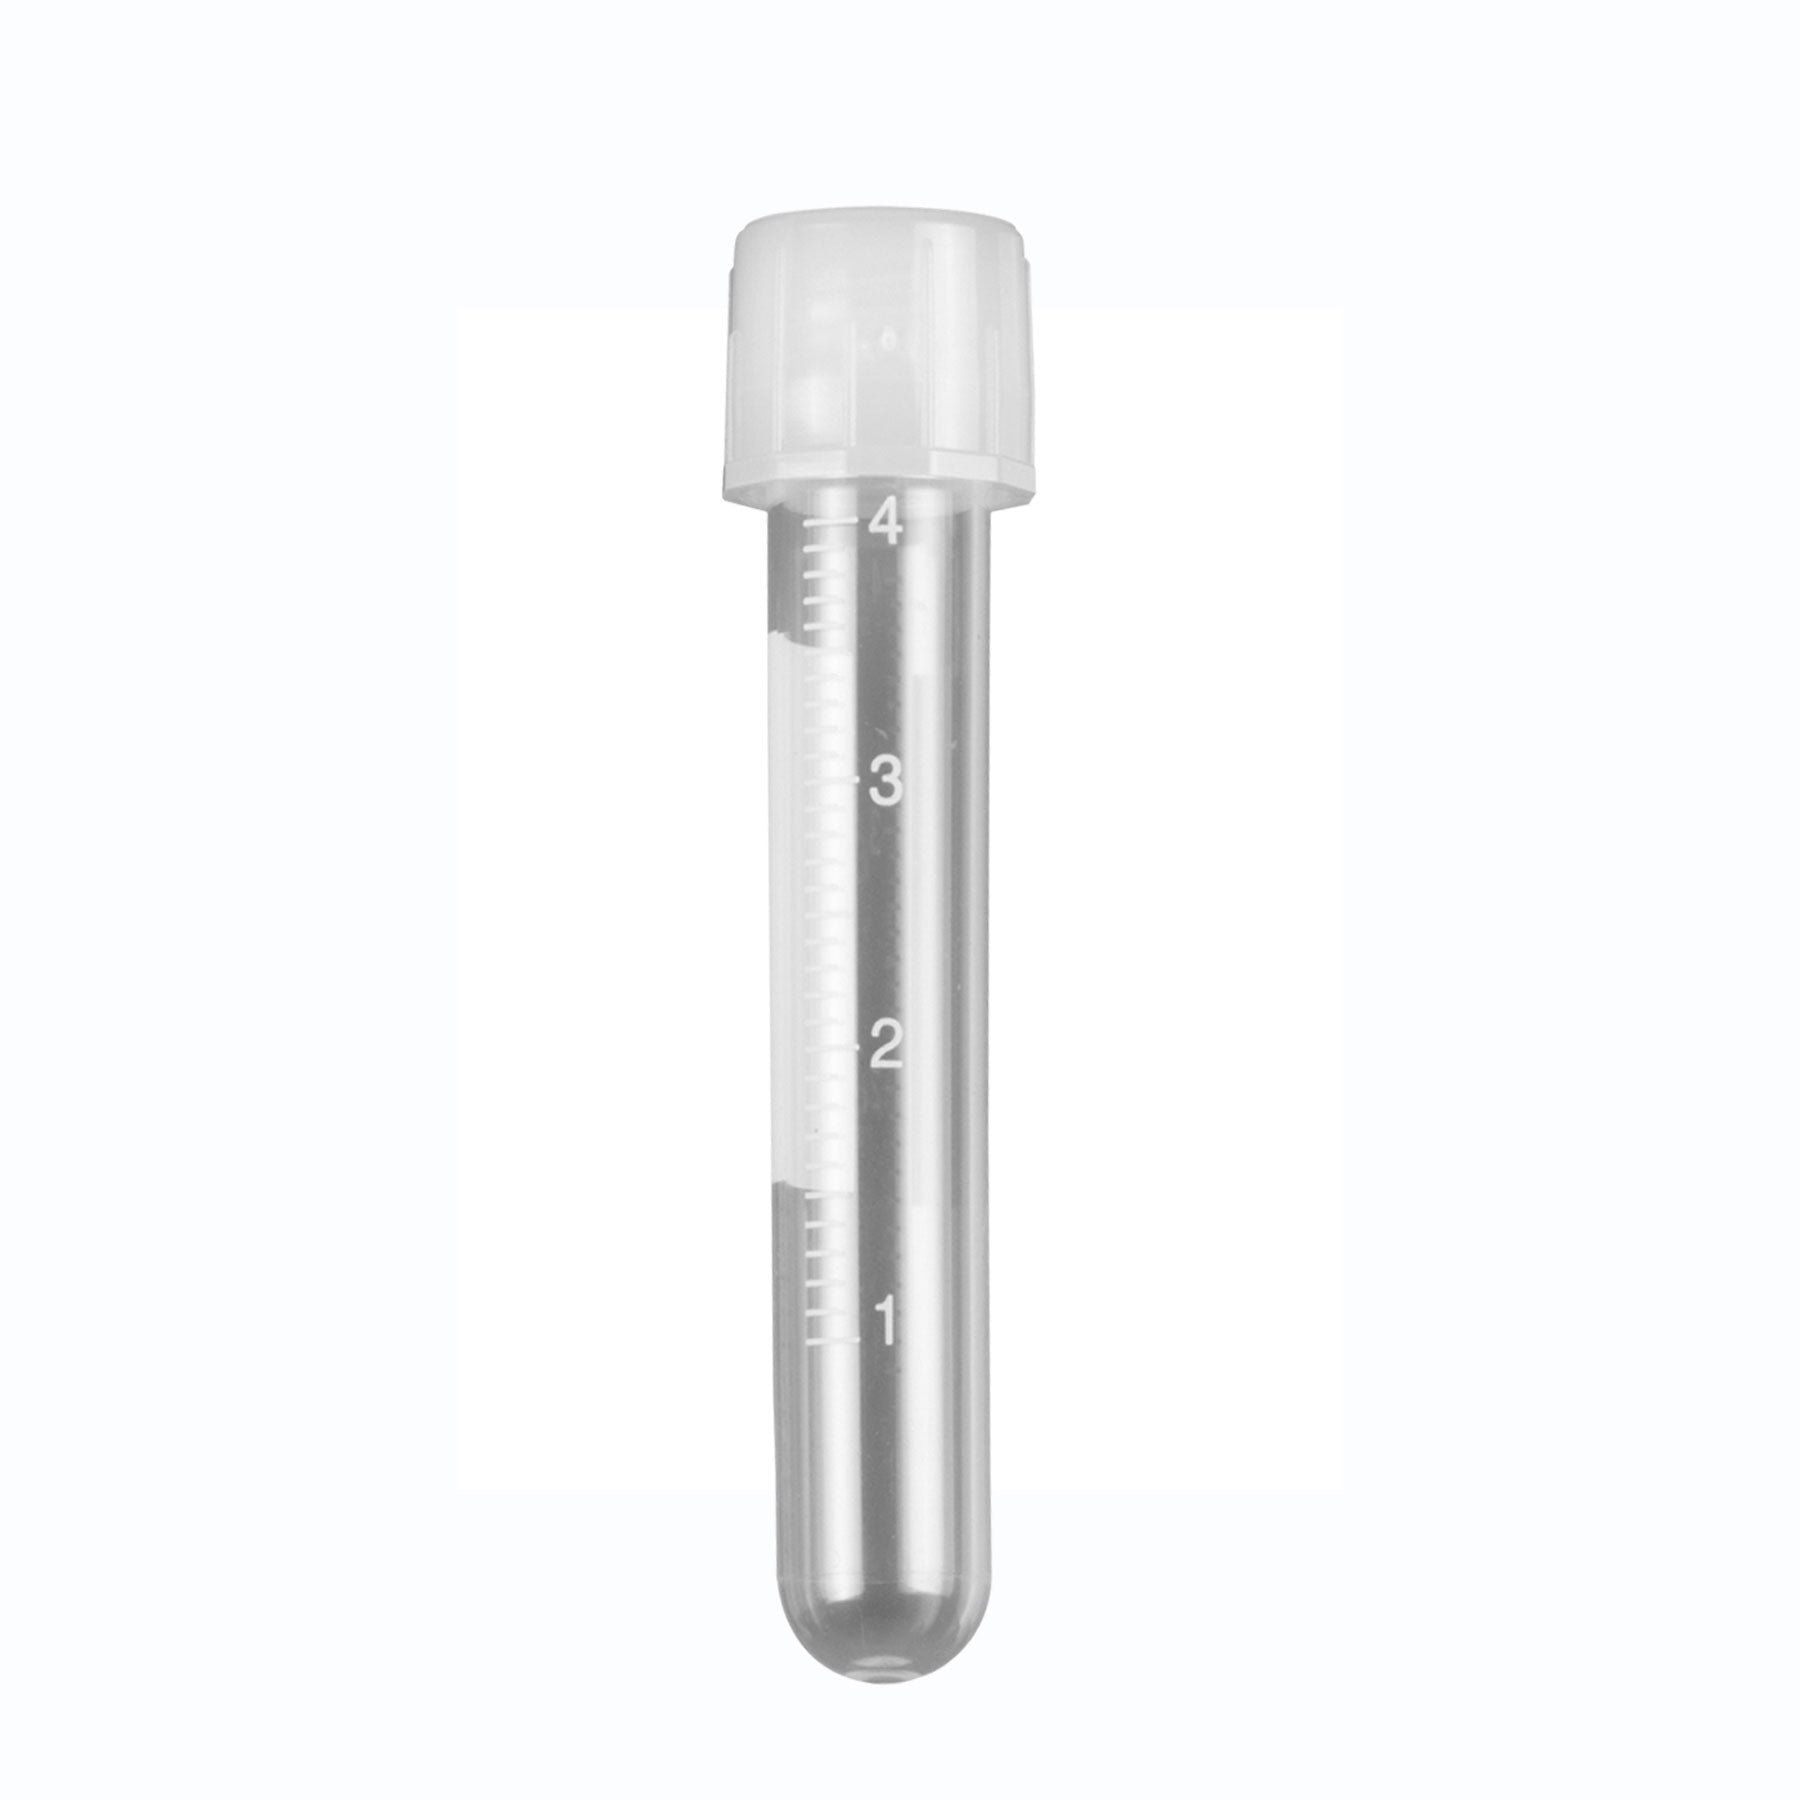 MTC Bio T8732, DuoClick Culture Tube, 5ml, 12 X 75Mm, PP, with Attached 2-Position Screw-Cap, Printed Graduations, Sterile, 10 Foam Racks Of 50 Tubes, 500/Case